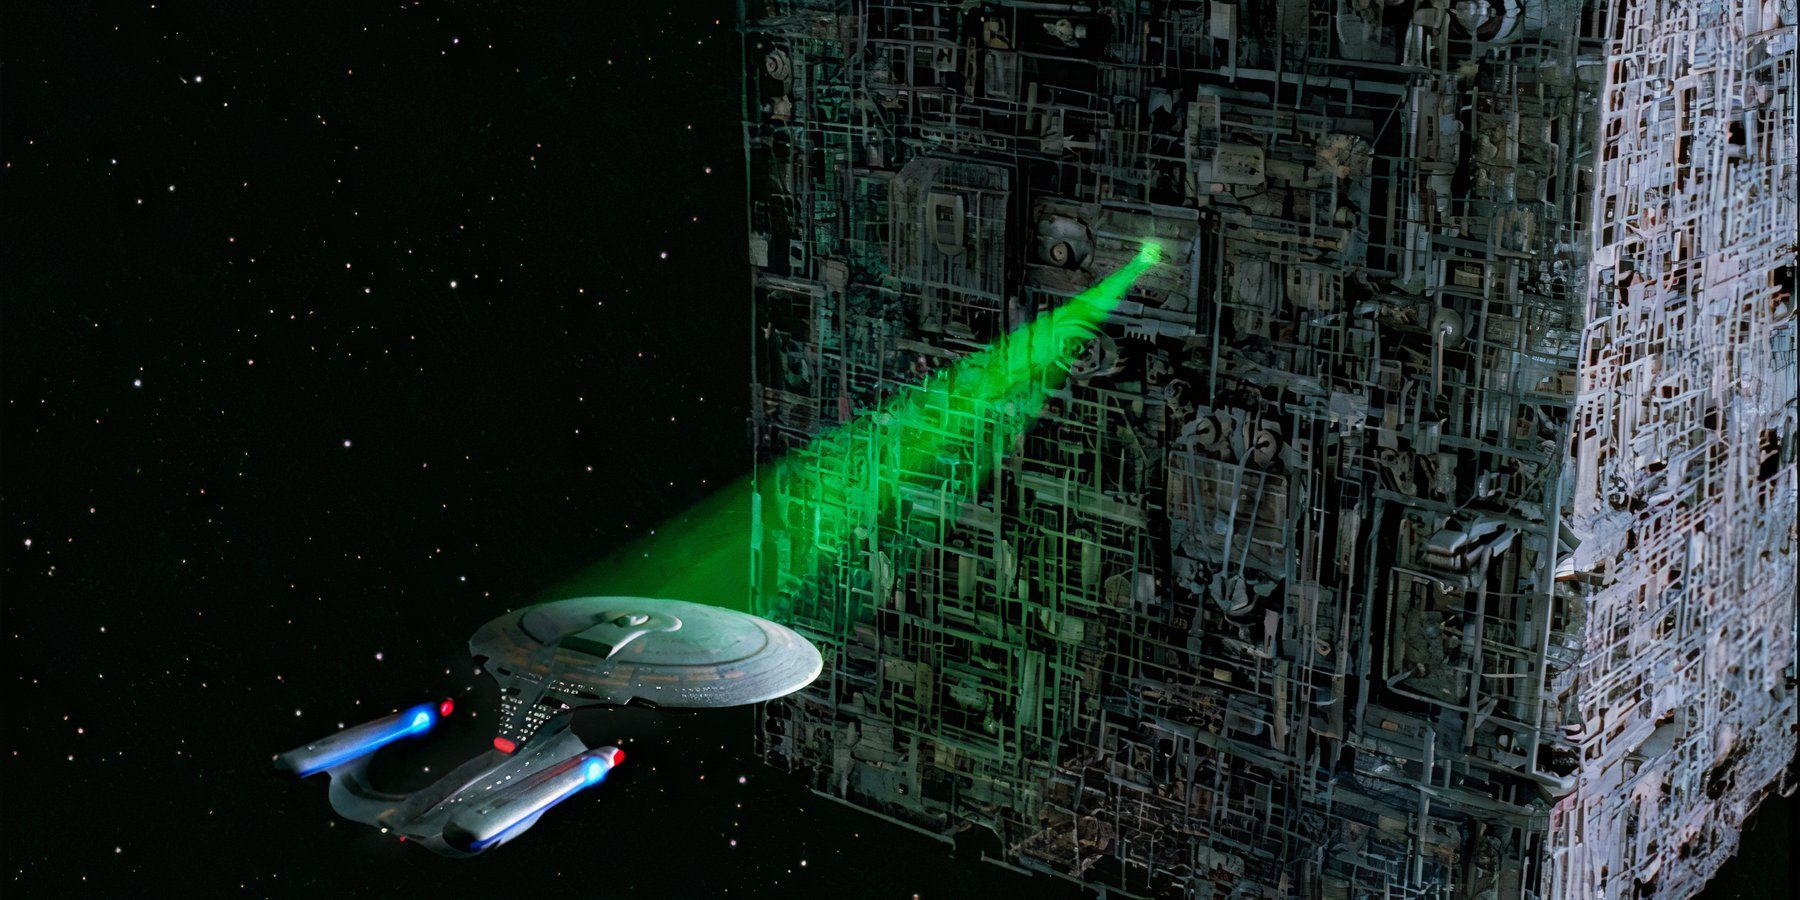 The Enterprise-D's first encounter with a Borg Cube in Star Trek: The Next Generation's Q Who